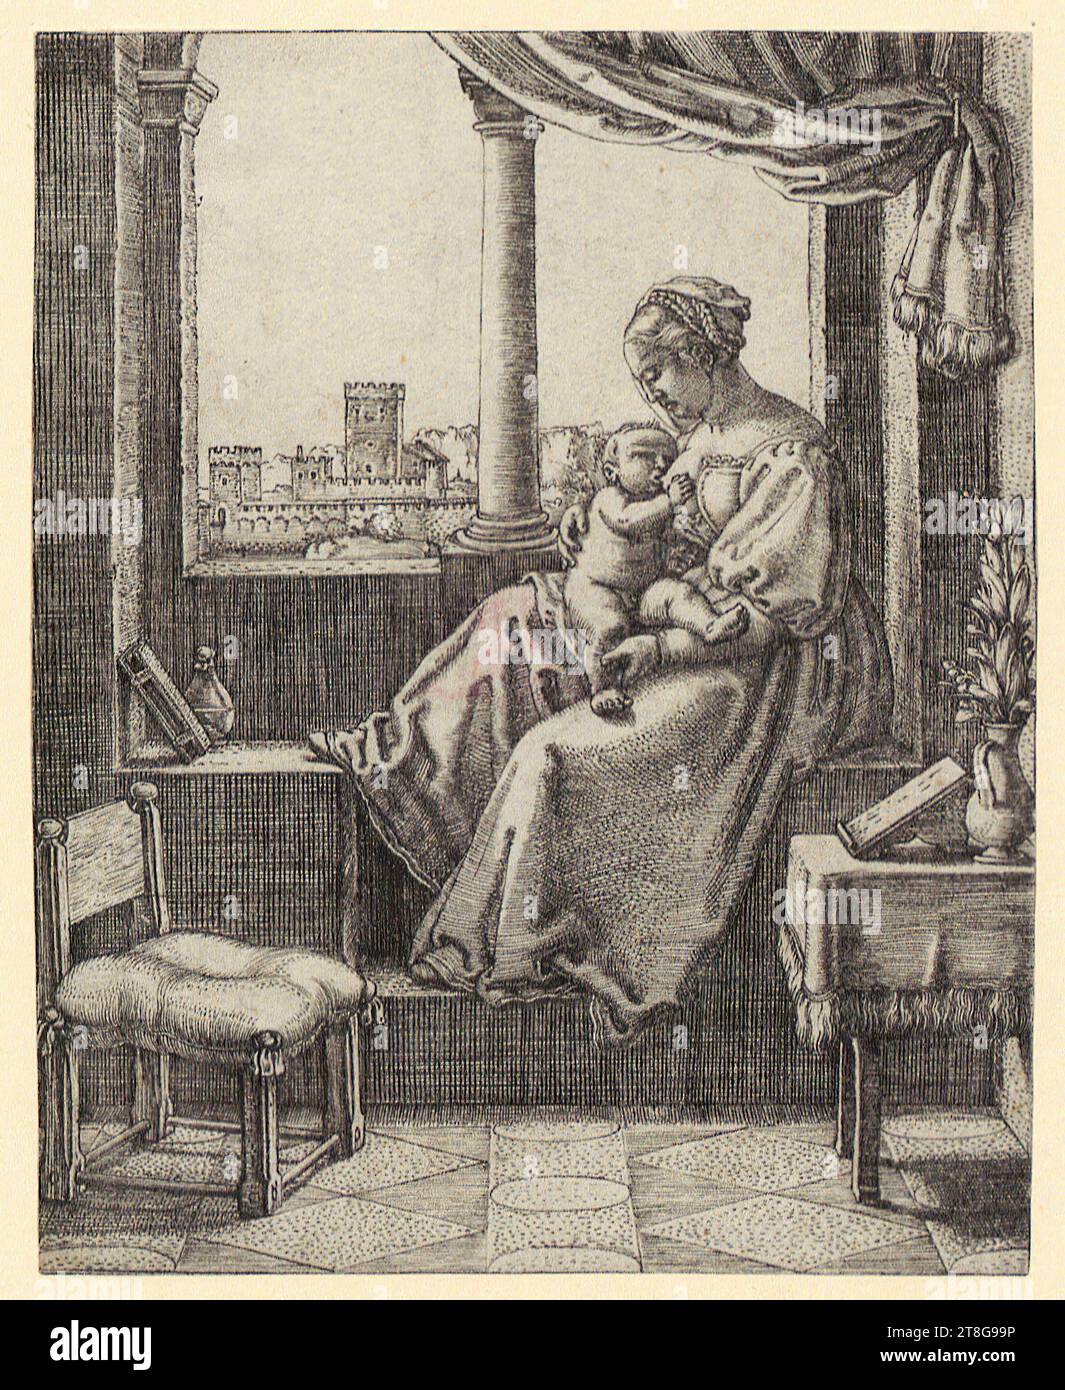 Barthel Beham (1502 - 1540), artist, Virgin Mary with Child seated in window niche Maria lactans, print medium: circa 1529, copperplate engraving, sheet size: 10.4 x 8.3 cm Stock Photo